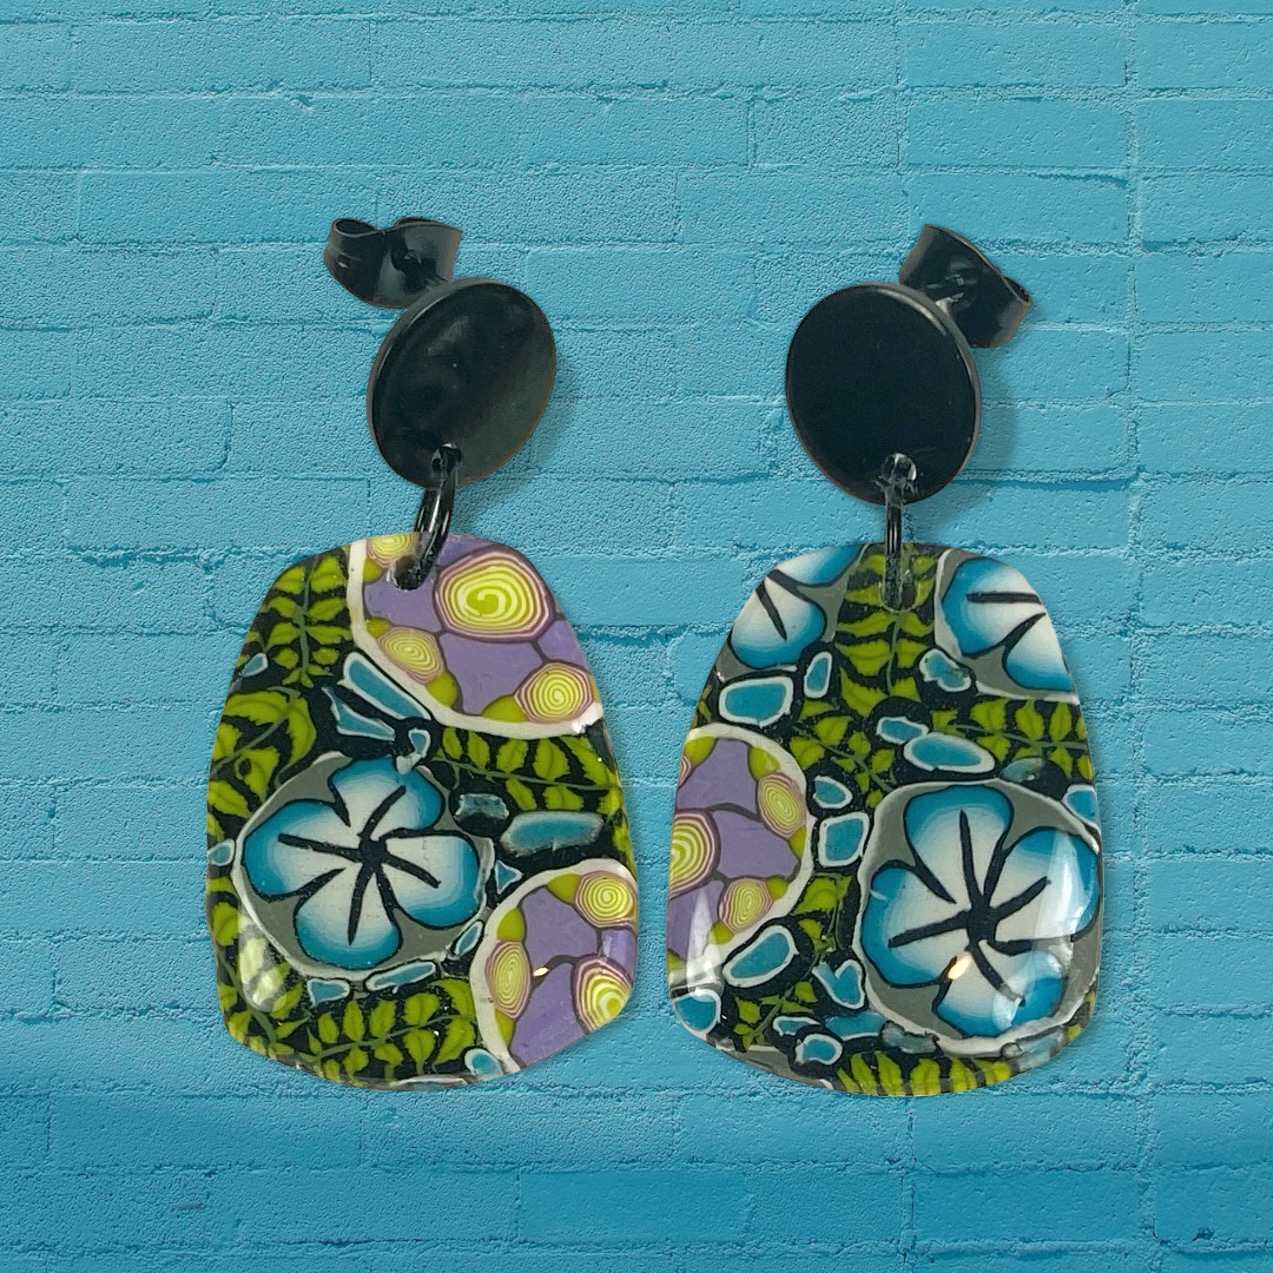 Twilight Blooms Earrings on a blue brick background